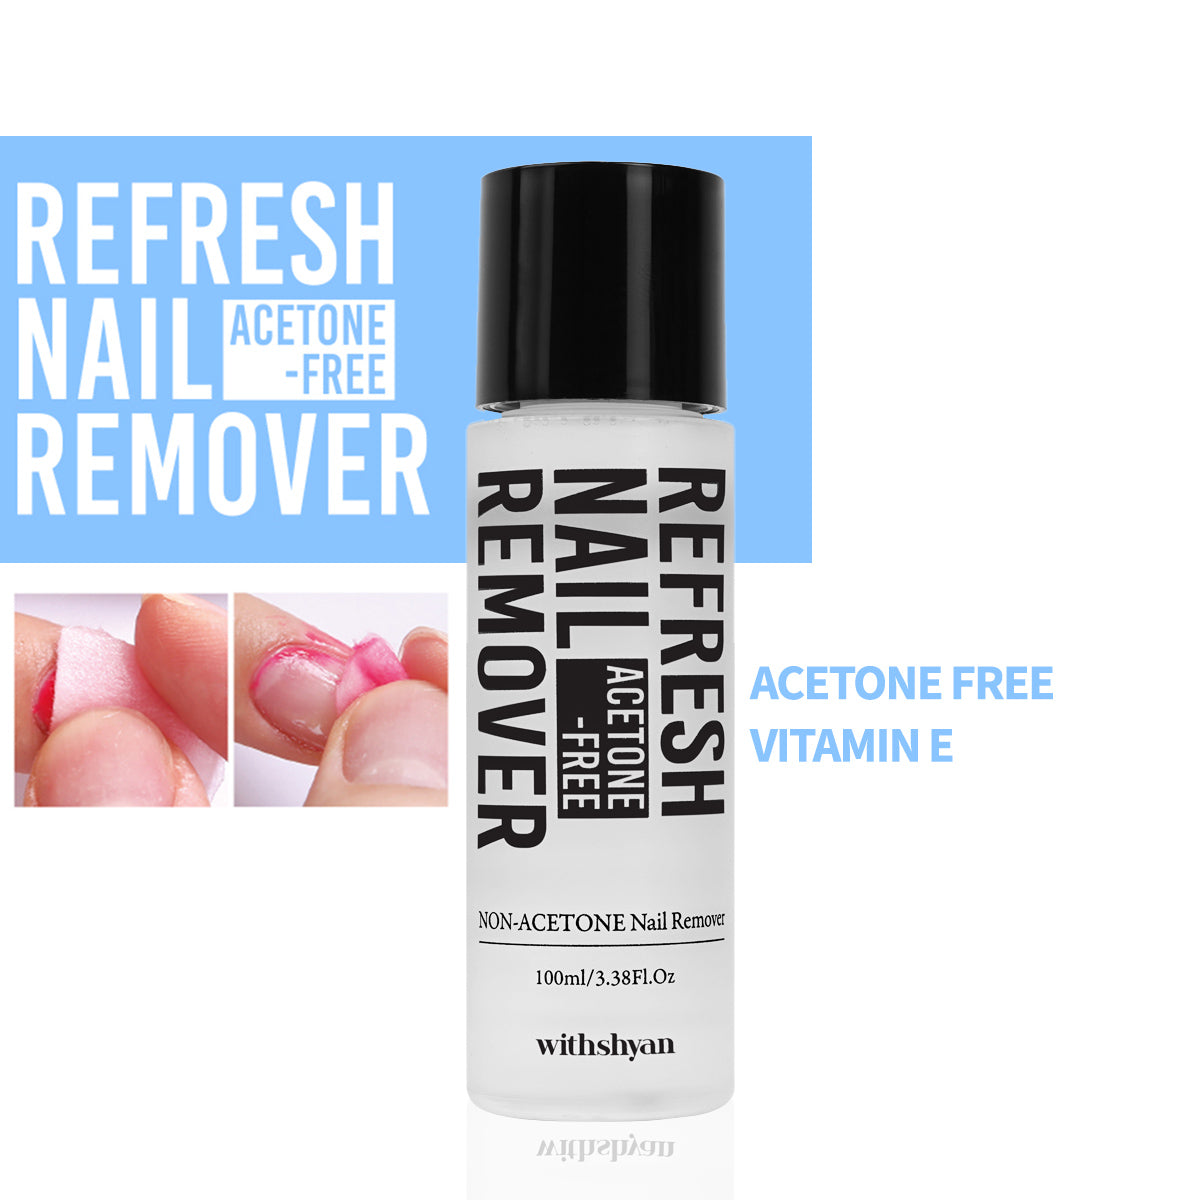 WithShyan Refresh Acetone Free Nail Polish Remover